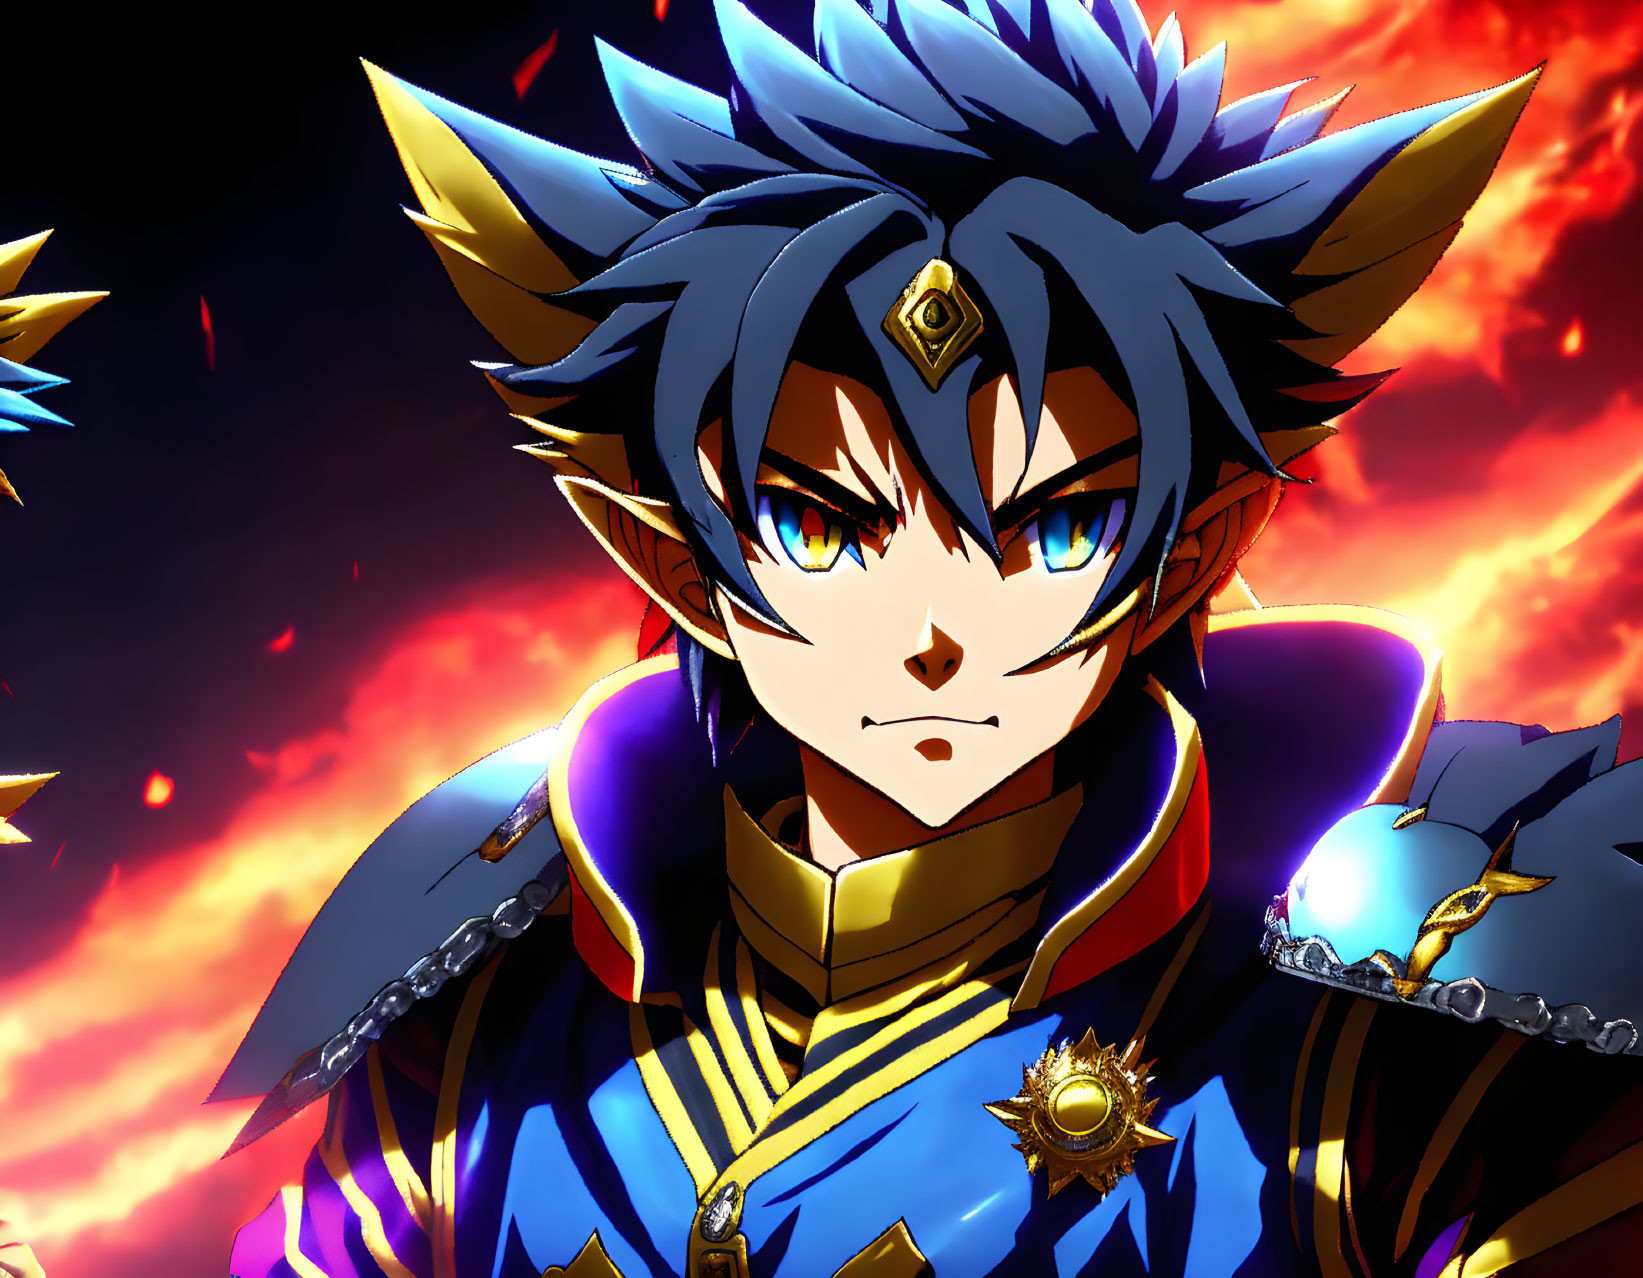 Anime character with spiky blue hair and golden blue armor in fiery background